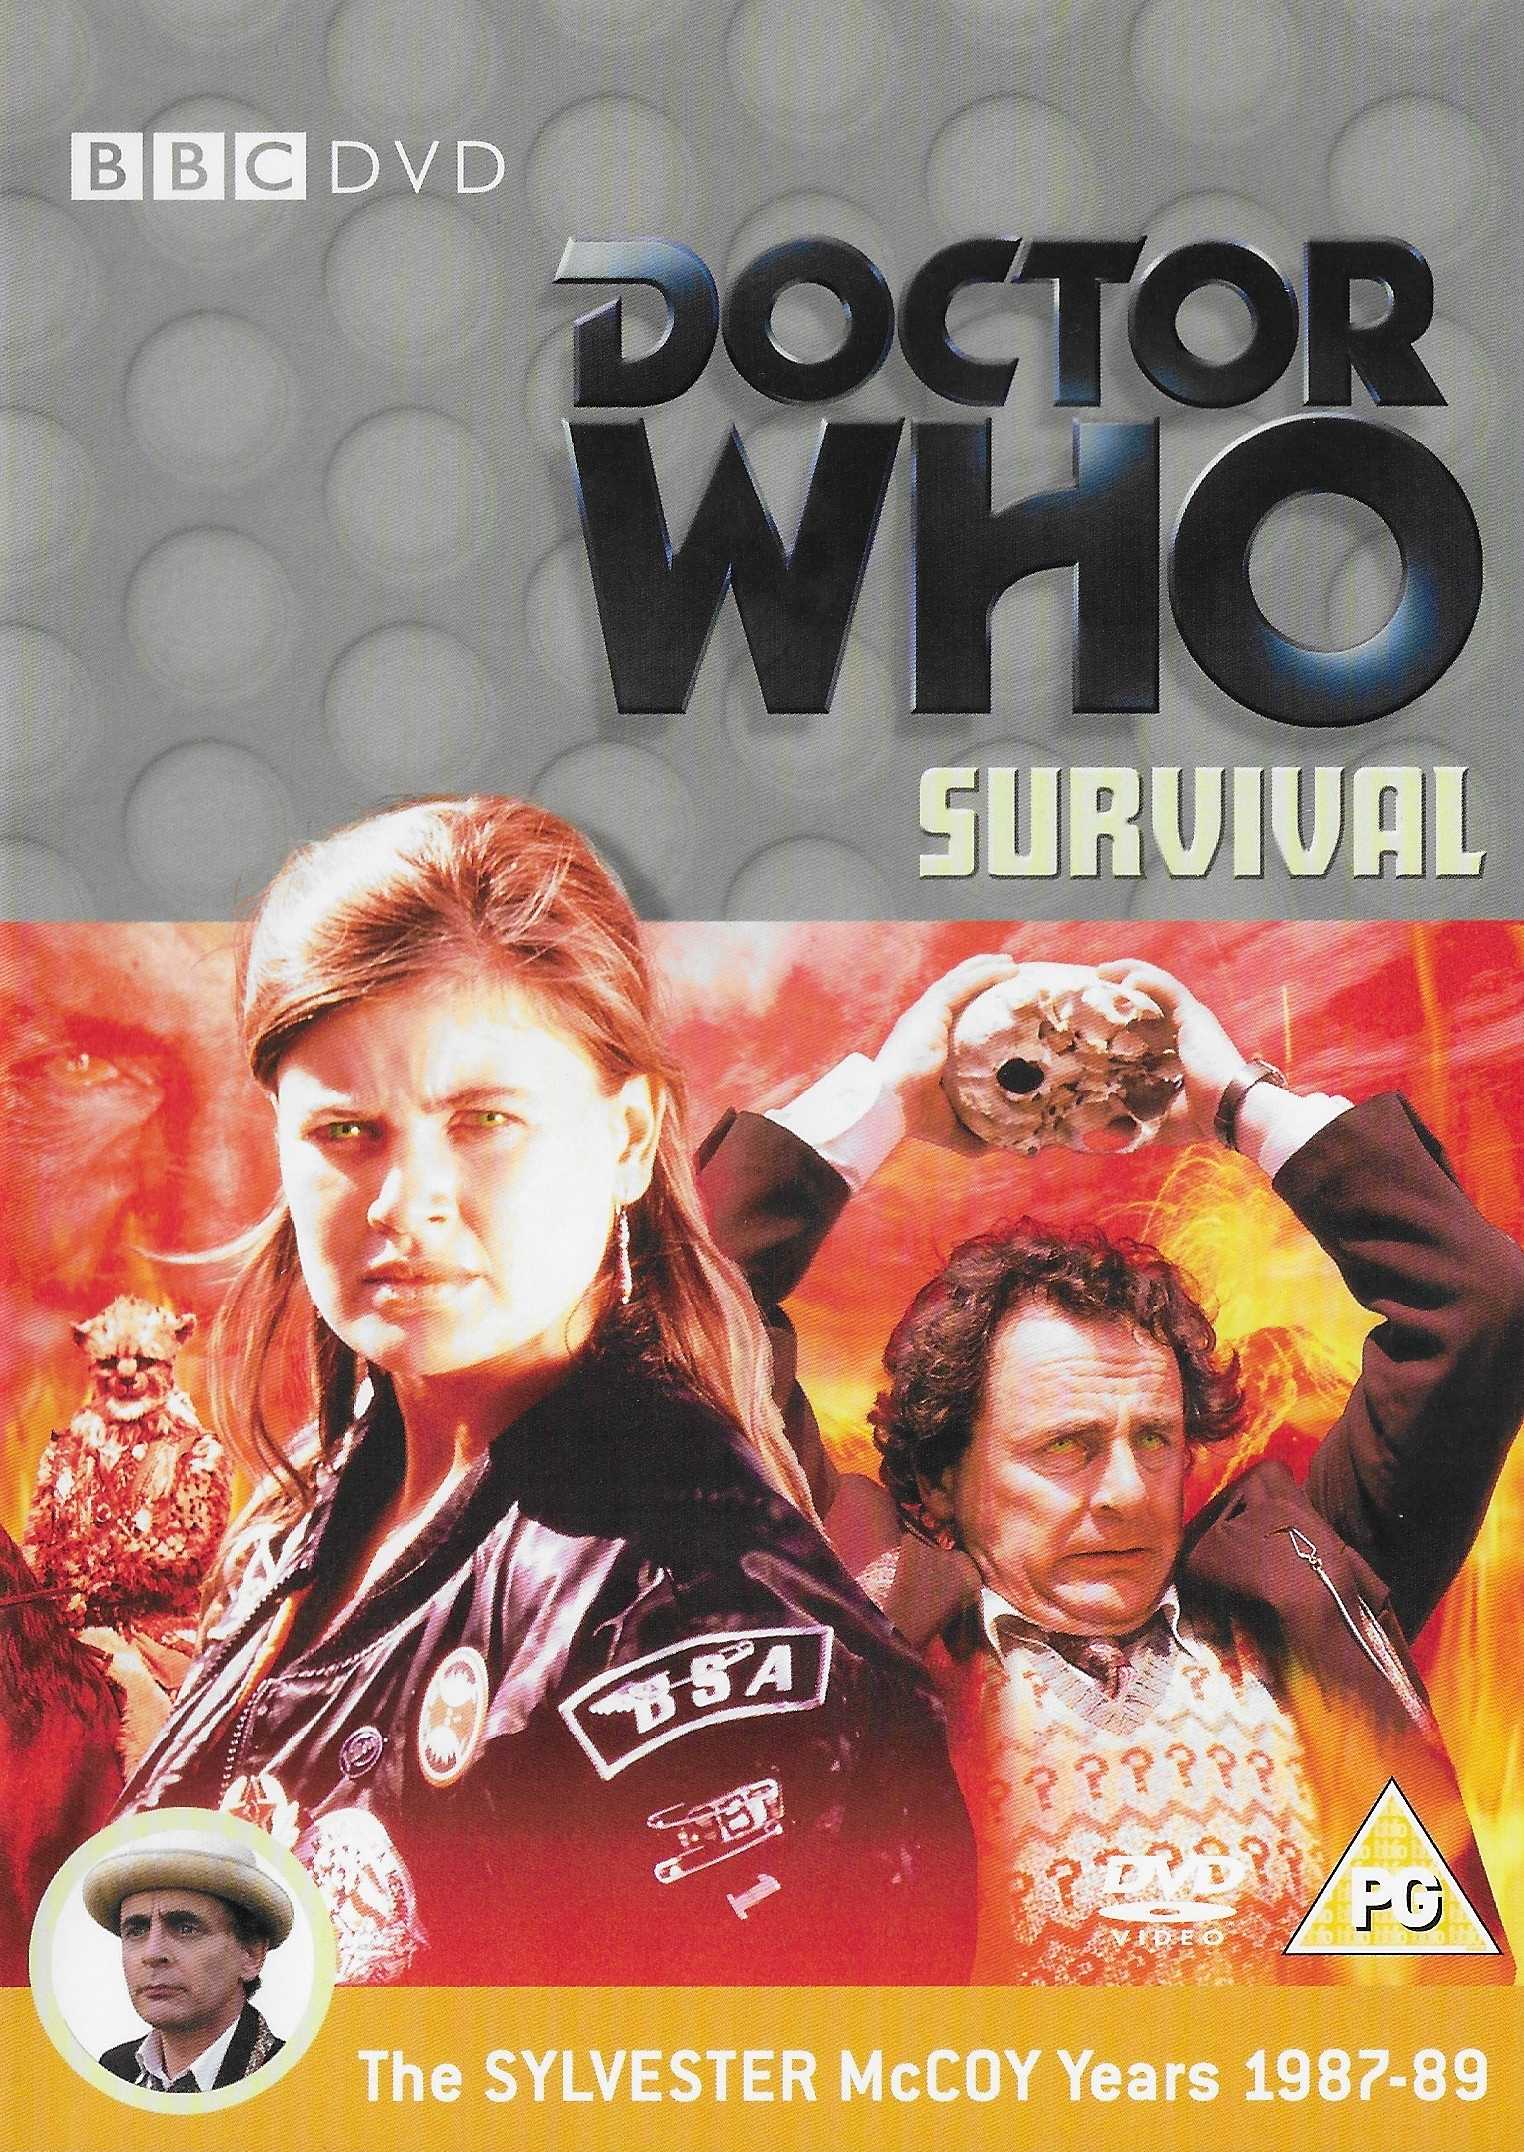 Picture of BBCDVD 1834 Doctor Who - Survival by artist Rona Munro from the BBC records and Tapes library